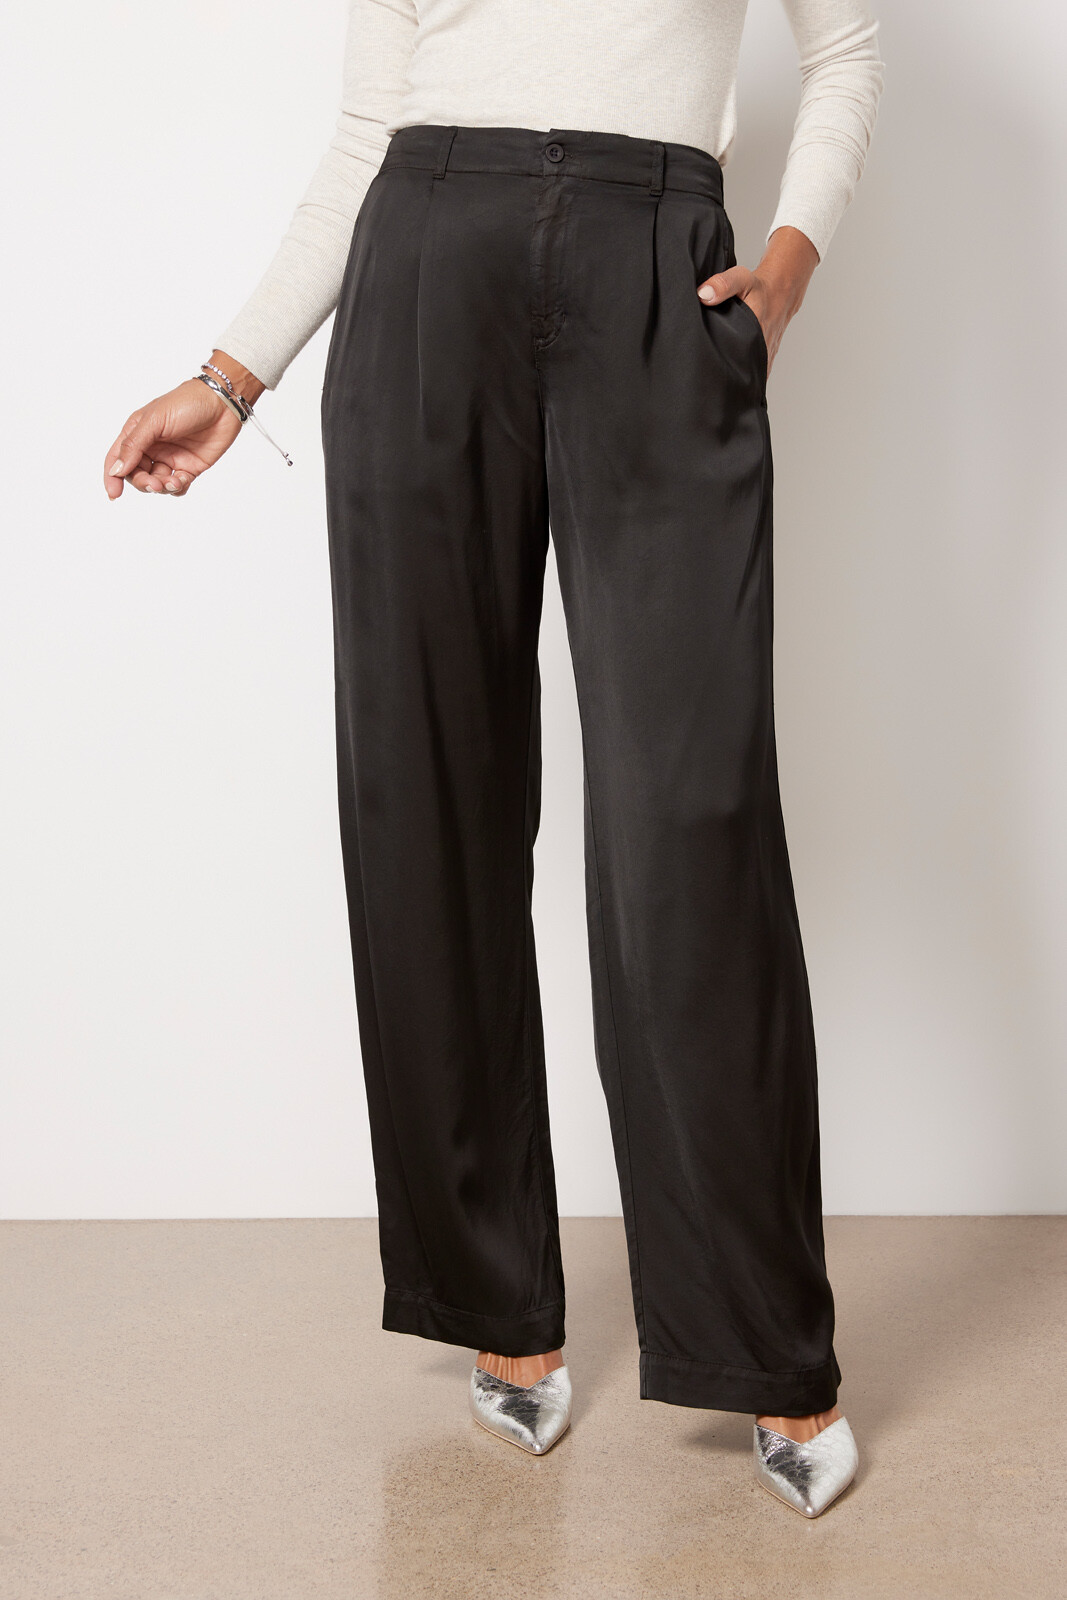 CLOTH AND STONE Satin Trouser